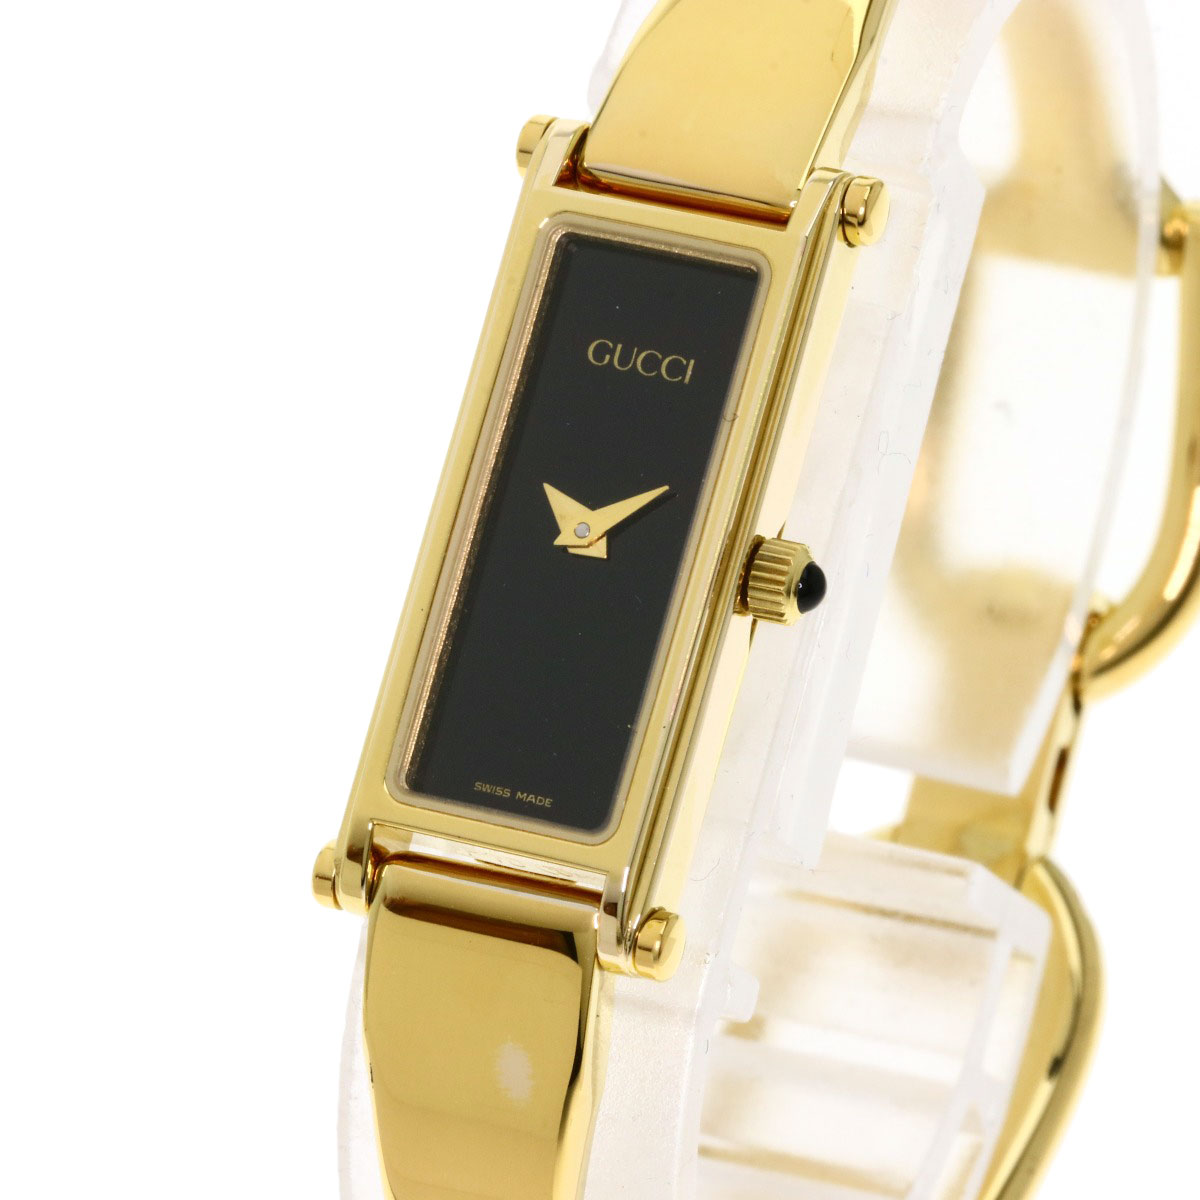 GUCCI Square face Watches 1500L Gold Plated/Gold Plated Ladies | eBay